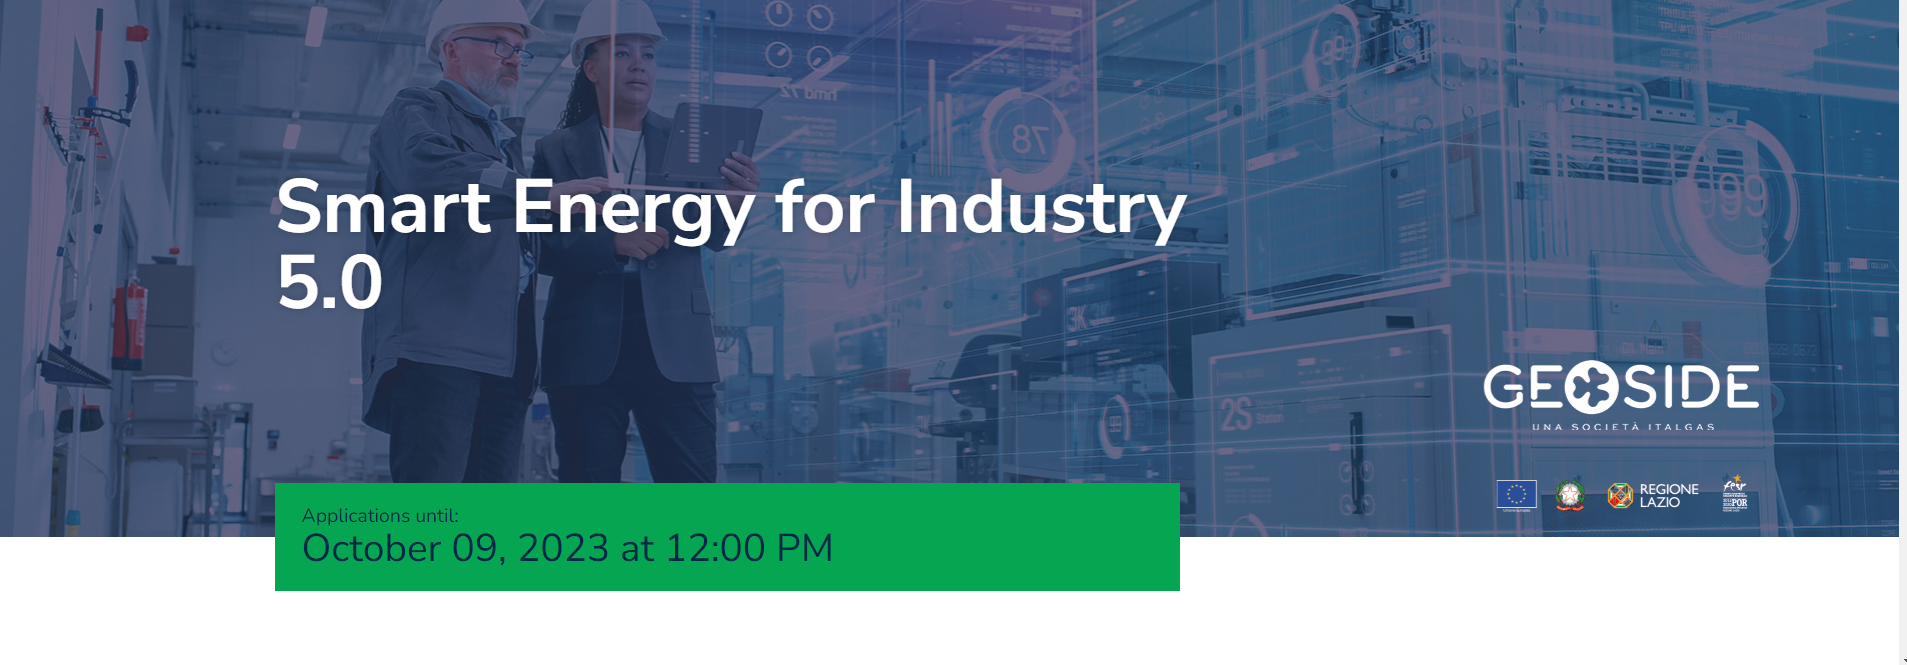 Smart Energy for Industry 5.0 